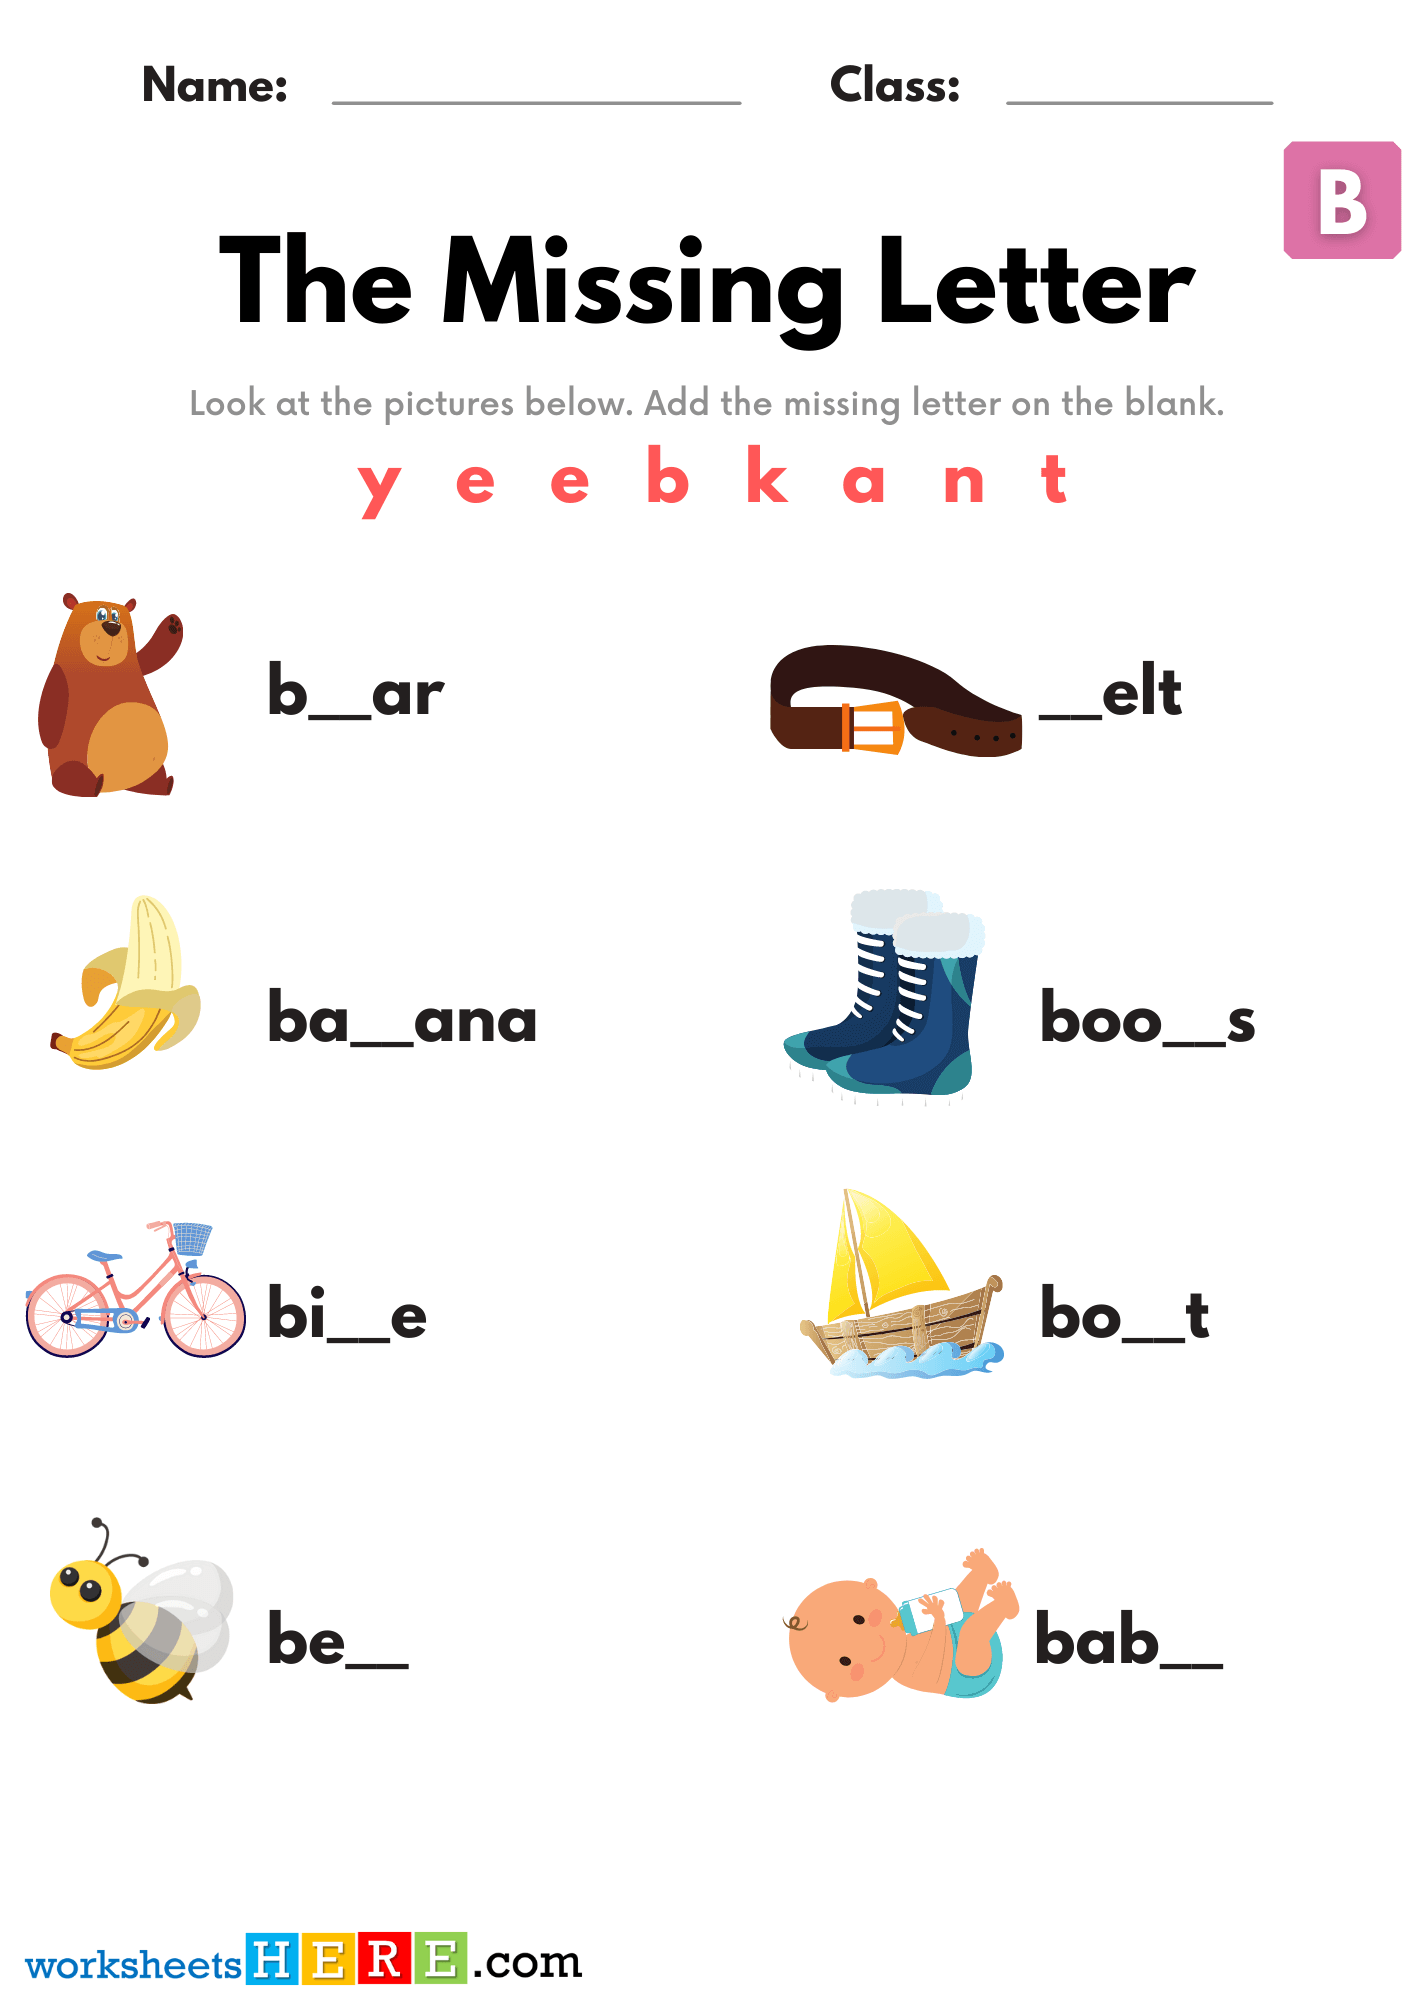 Find Missing Letters and Write, Starting Letter B Objects with Pictures PDF Worksheets